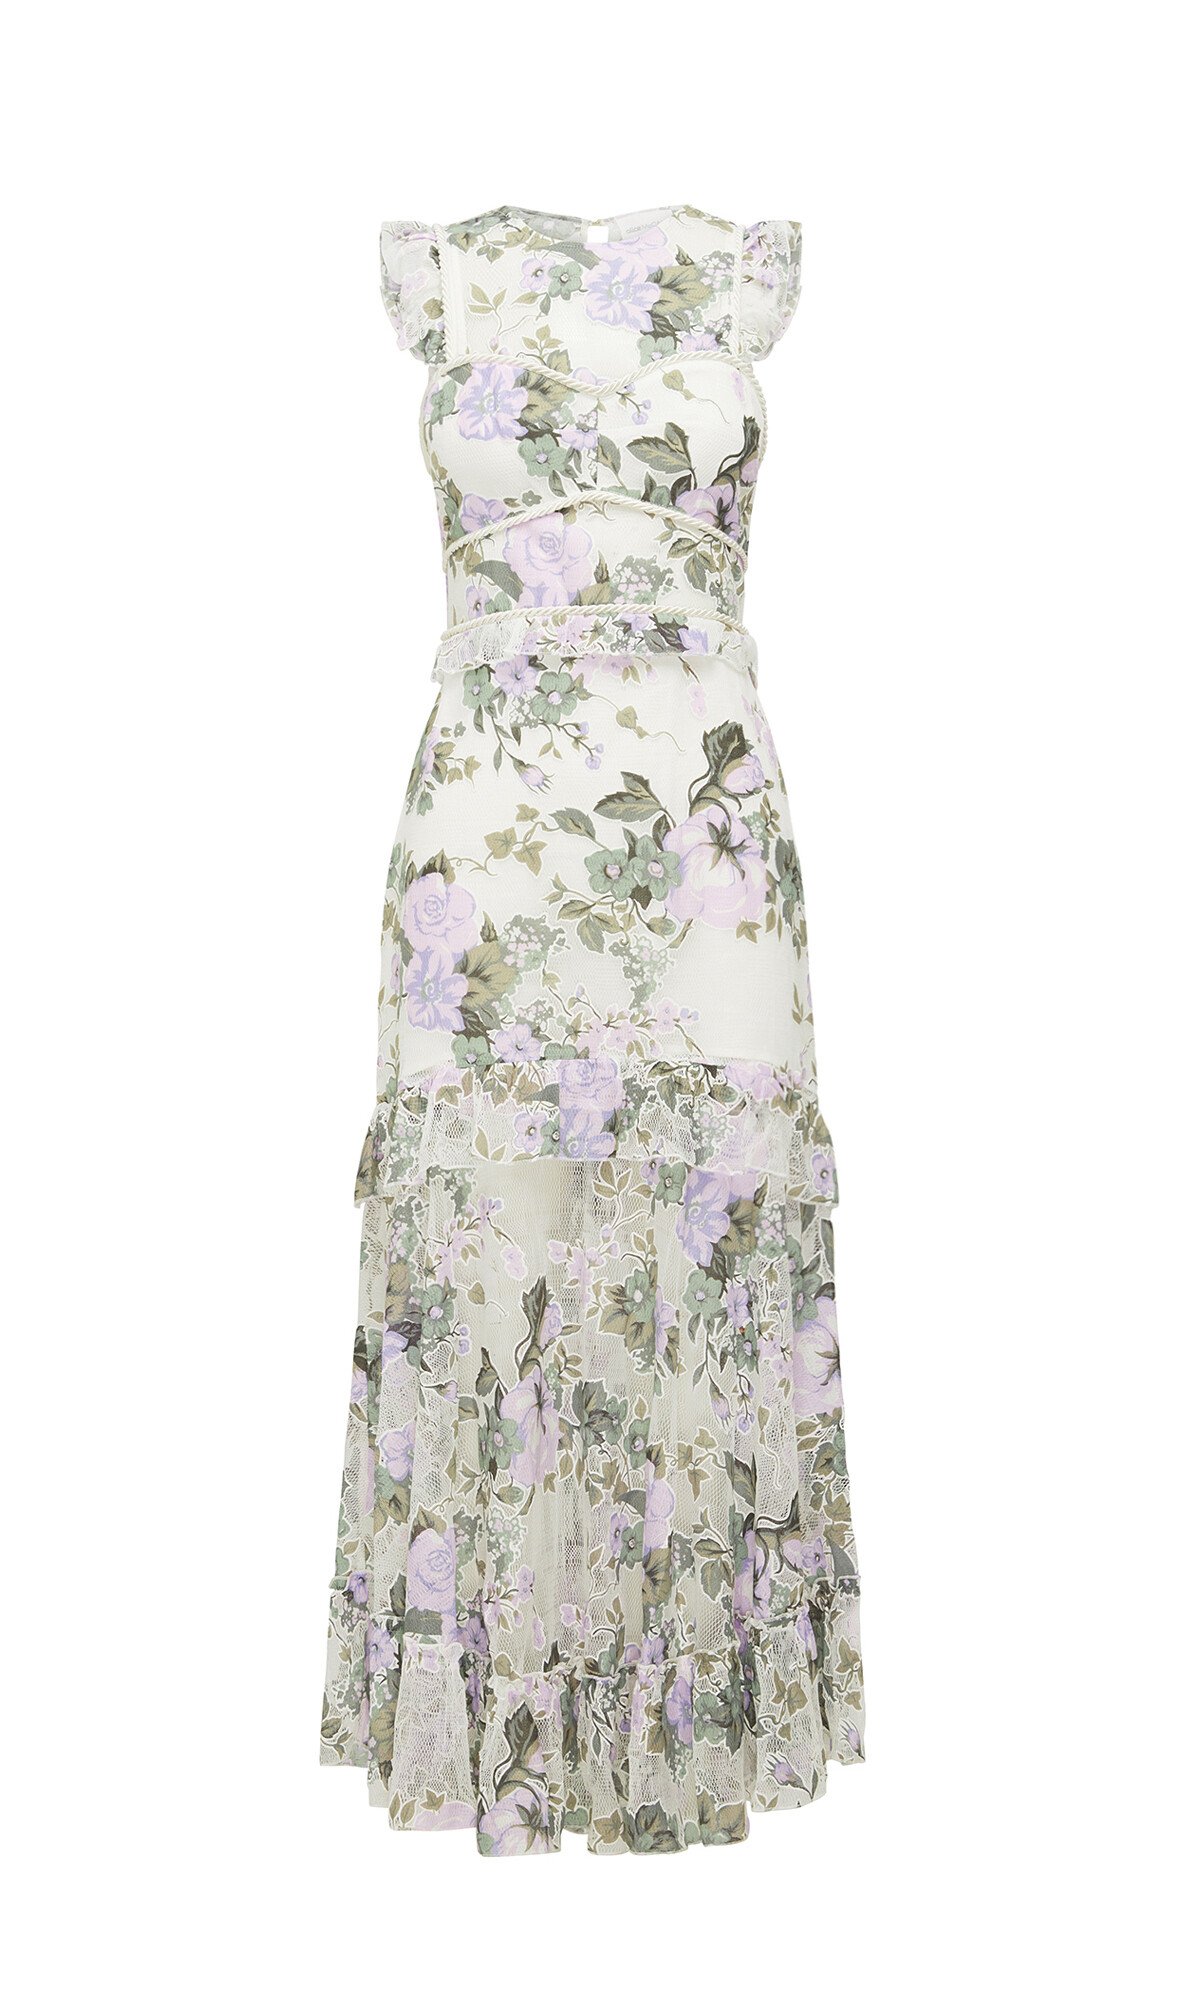 SO LOVELY DRESS LAVENDER- ALICE McCALL SUMMER 19 Boxing Day Sale